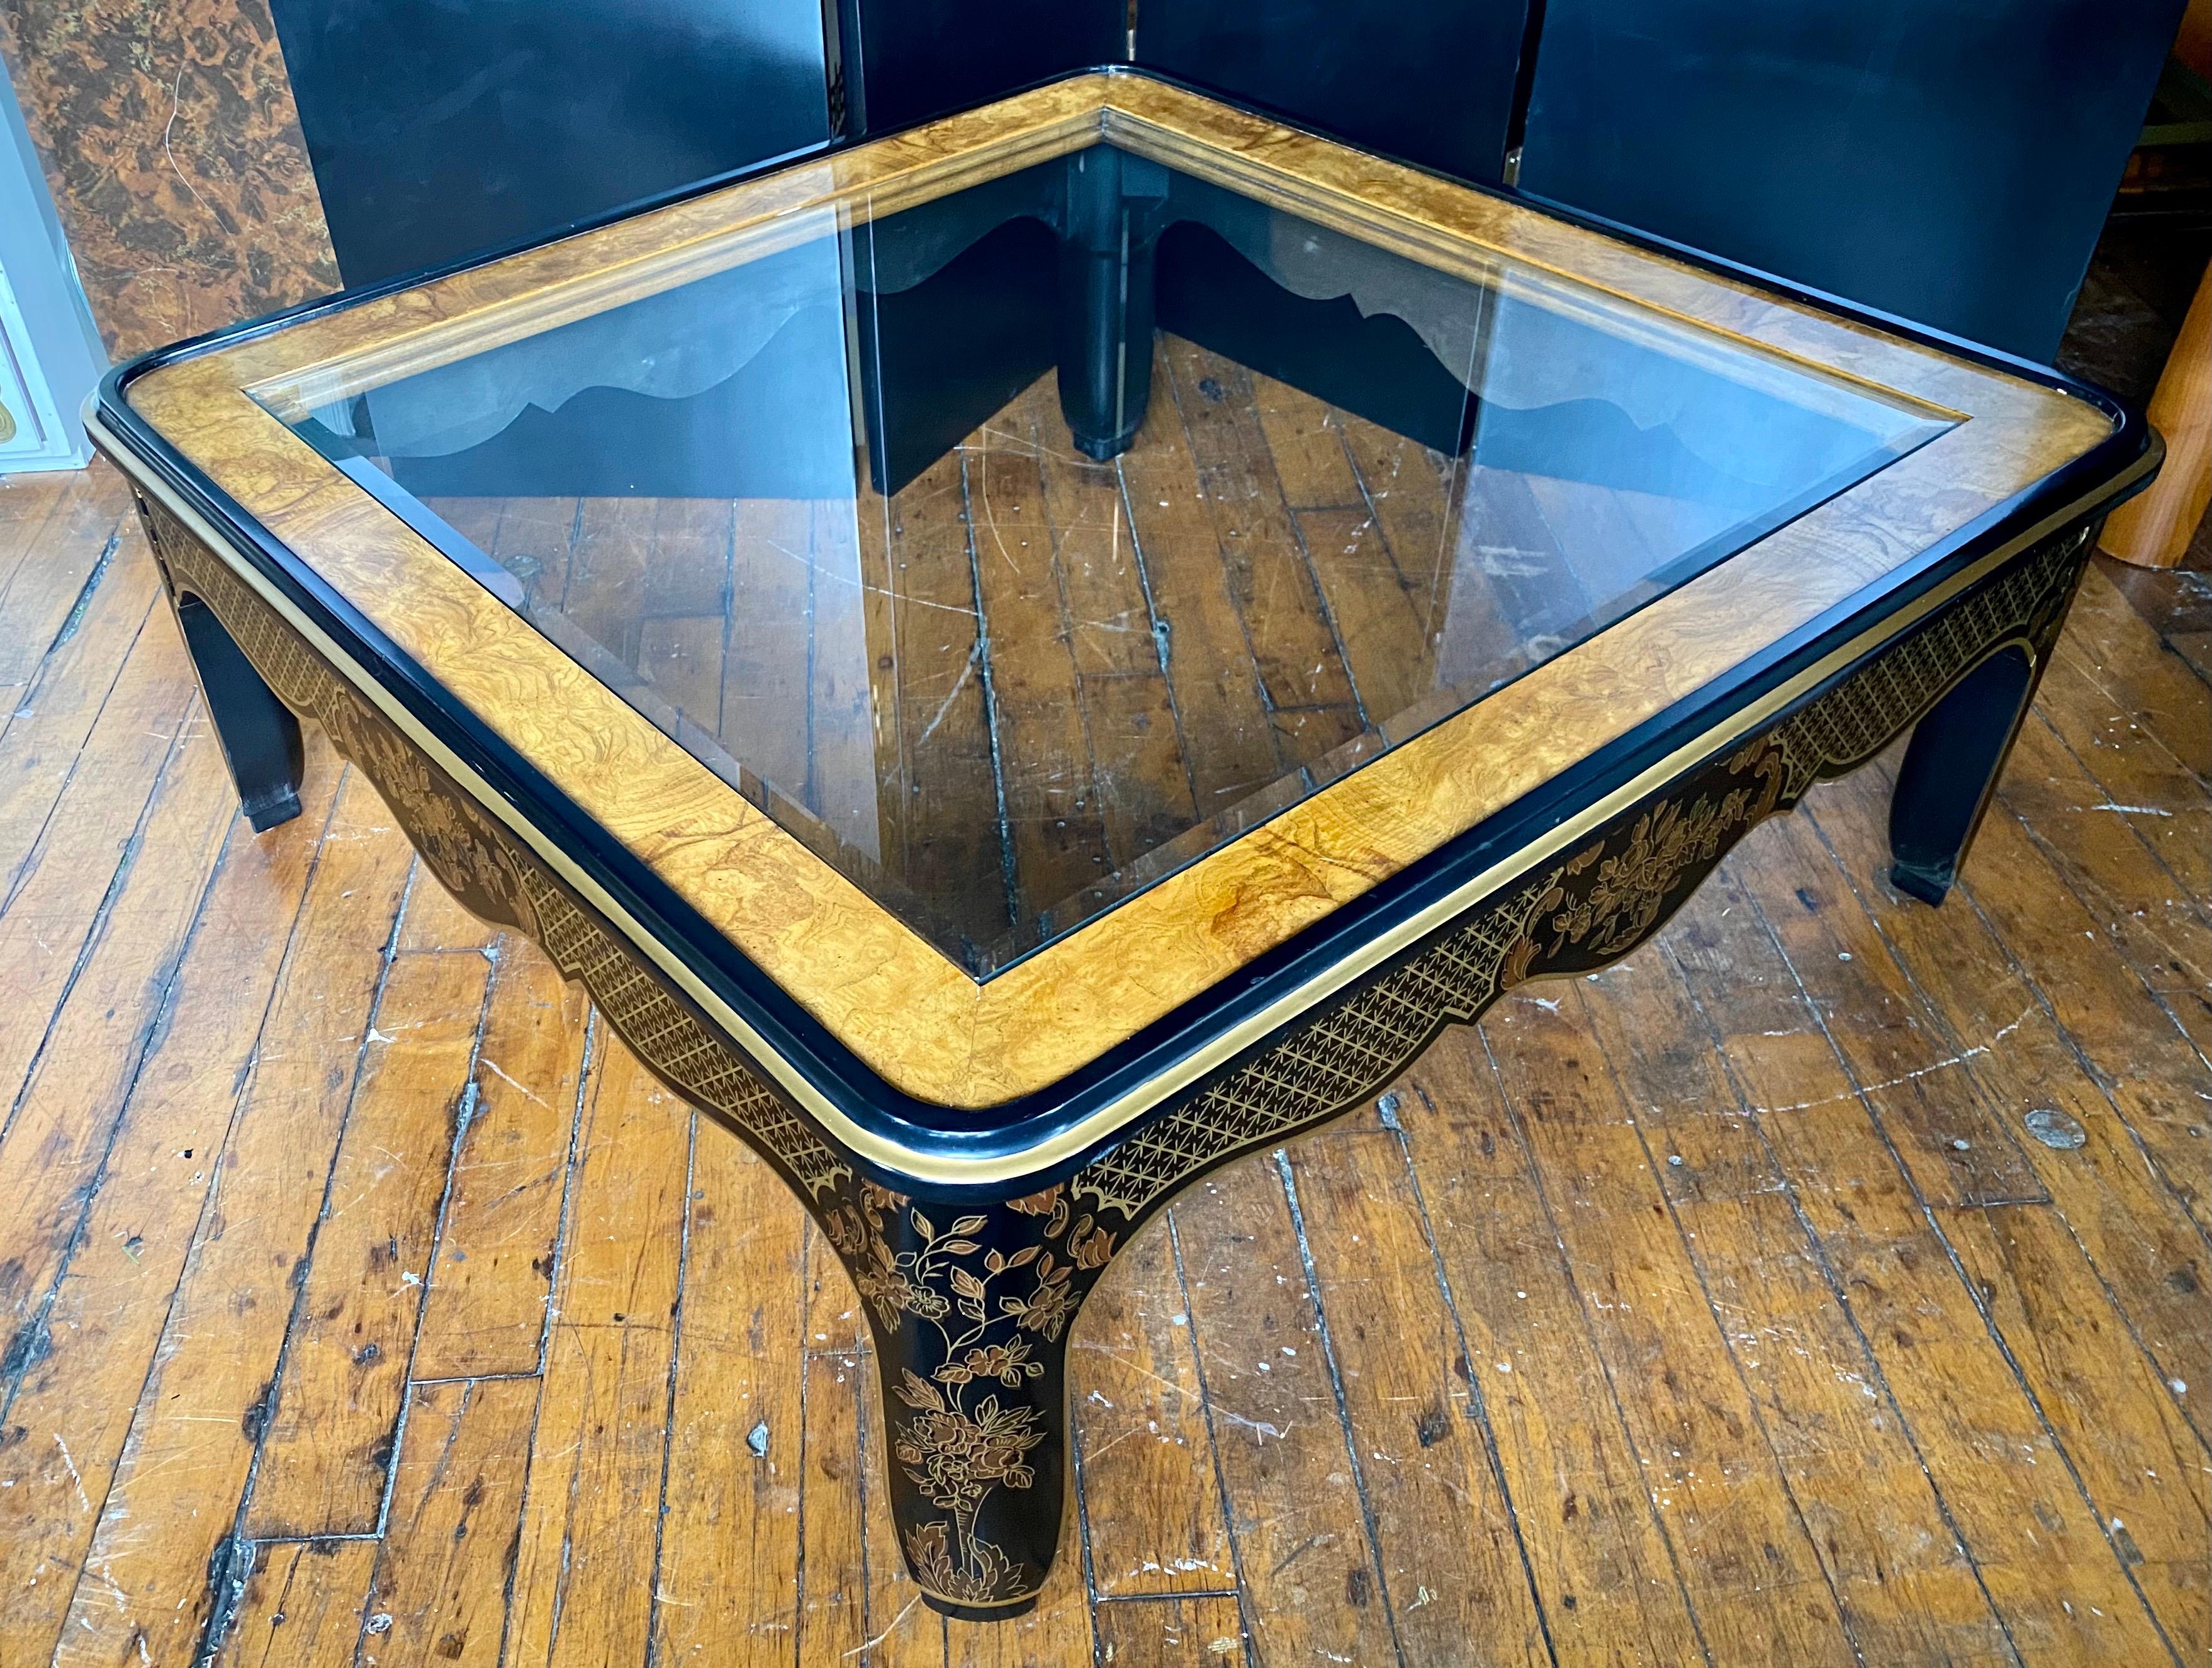 Large square Hollywood Regency style burl wood and glass coffee table by Drexel Furniture. This sculptural cocktail table features original gloss black wood frame with hand painted gold leaf detailing of fretwork and floral design. Includes original